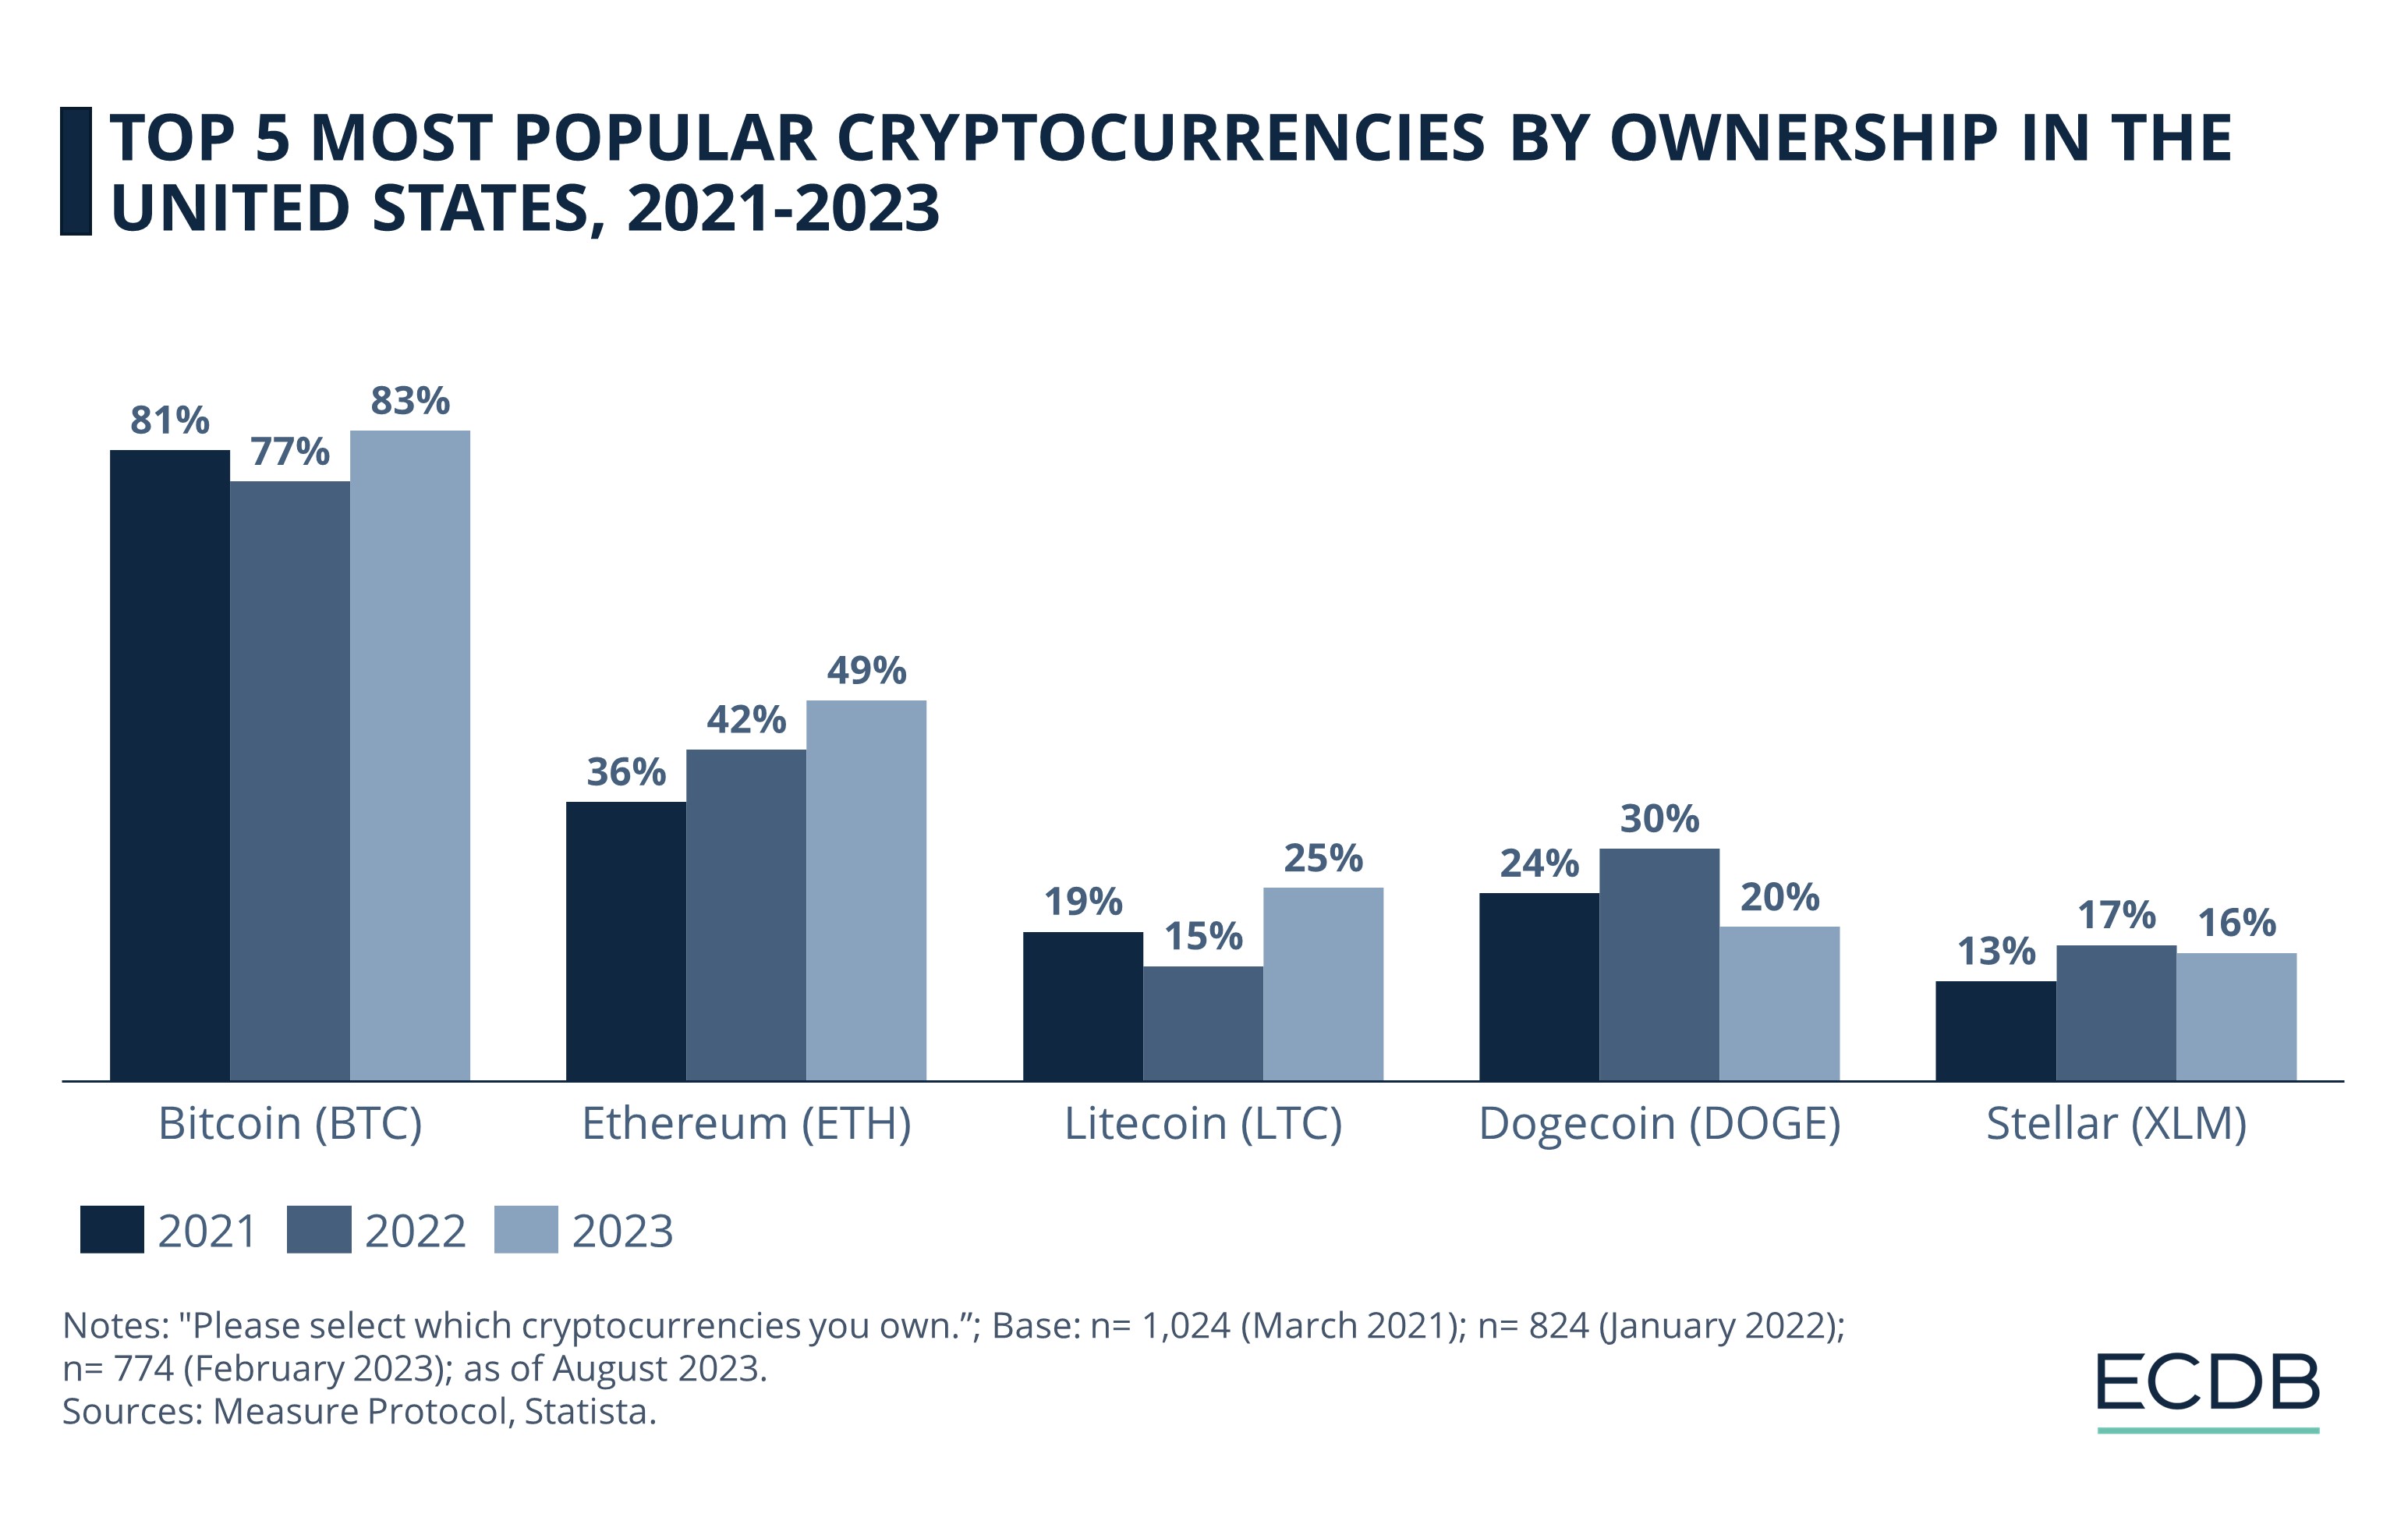 Top 5 Most Popular Cryptocurrencies by Ownership in the United States, 2021-2023